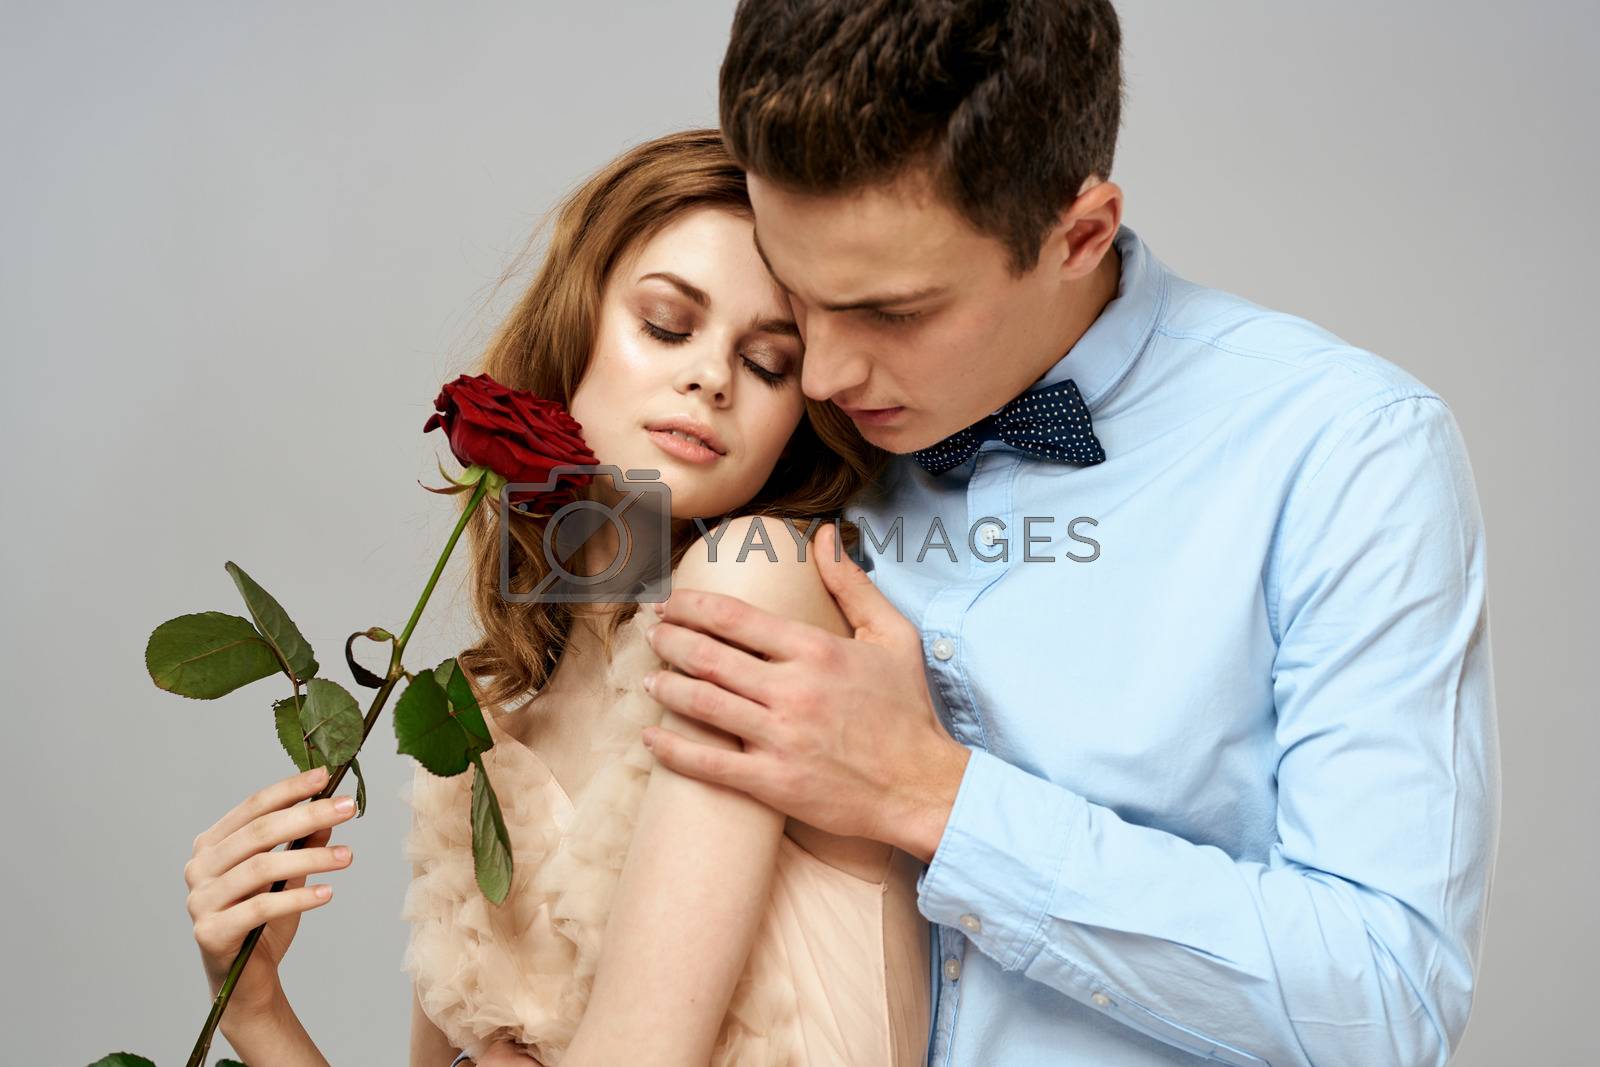 Cheerful young couple romance embrace relationship red rose lifestyle light background. High quality photo